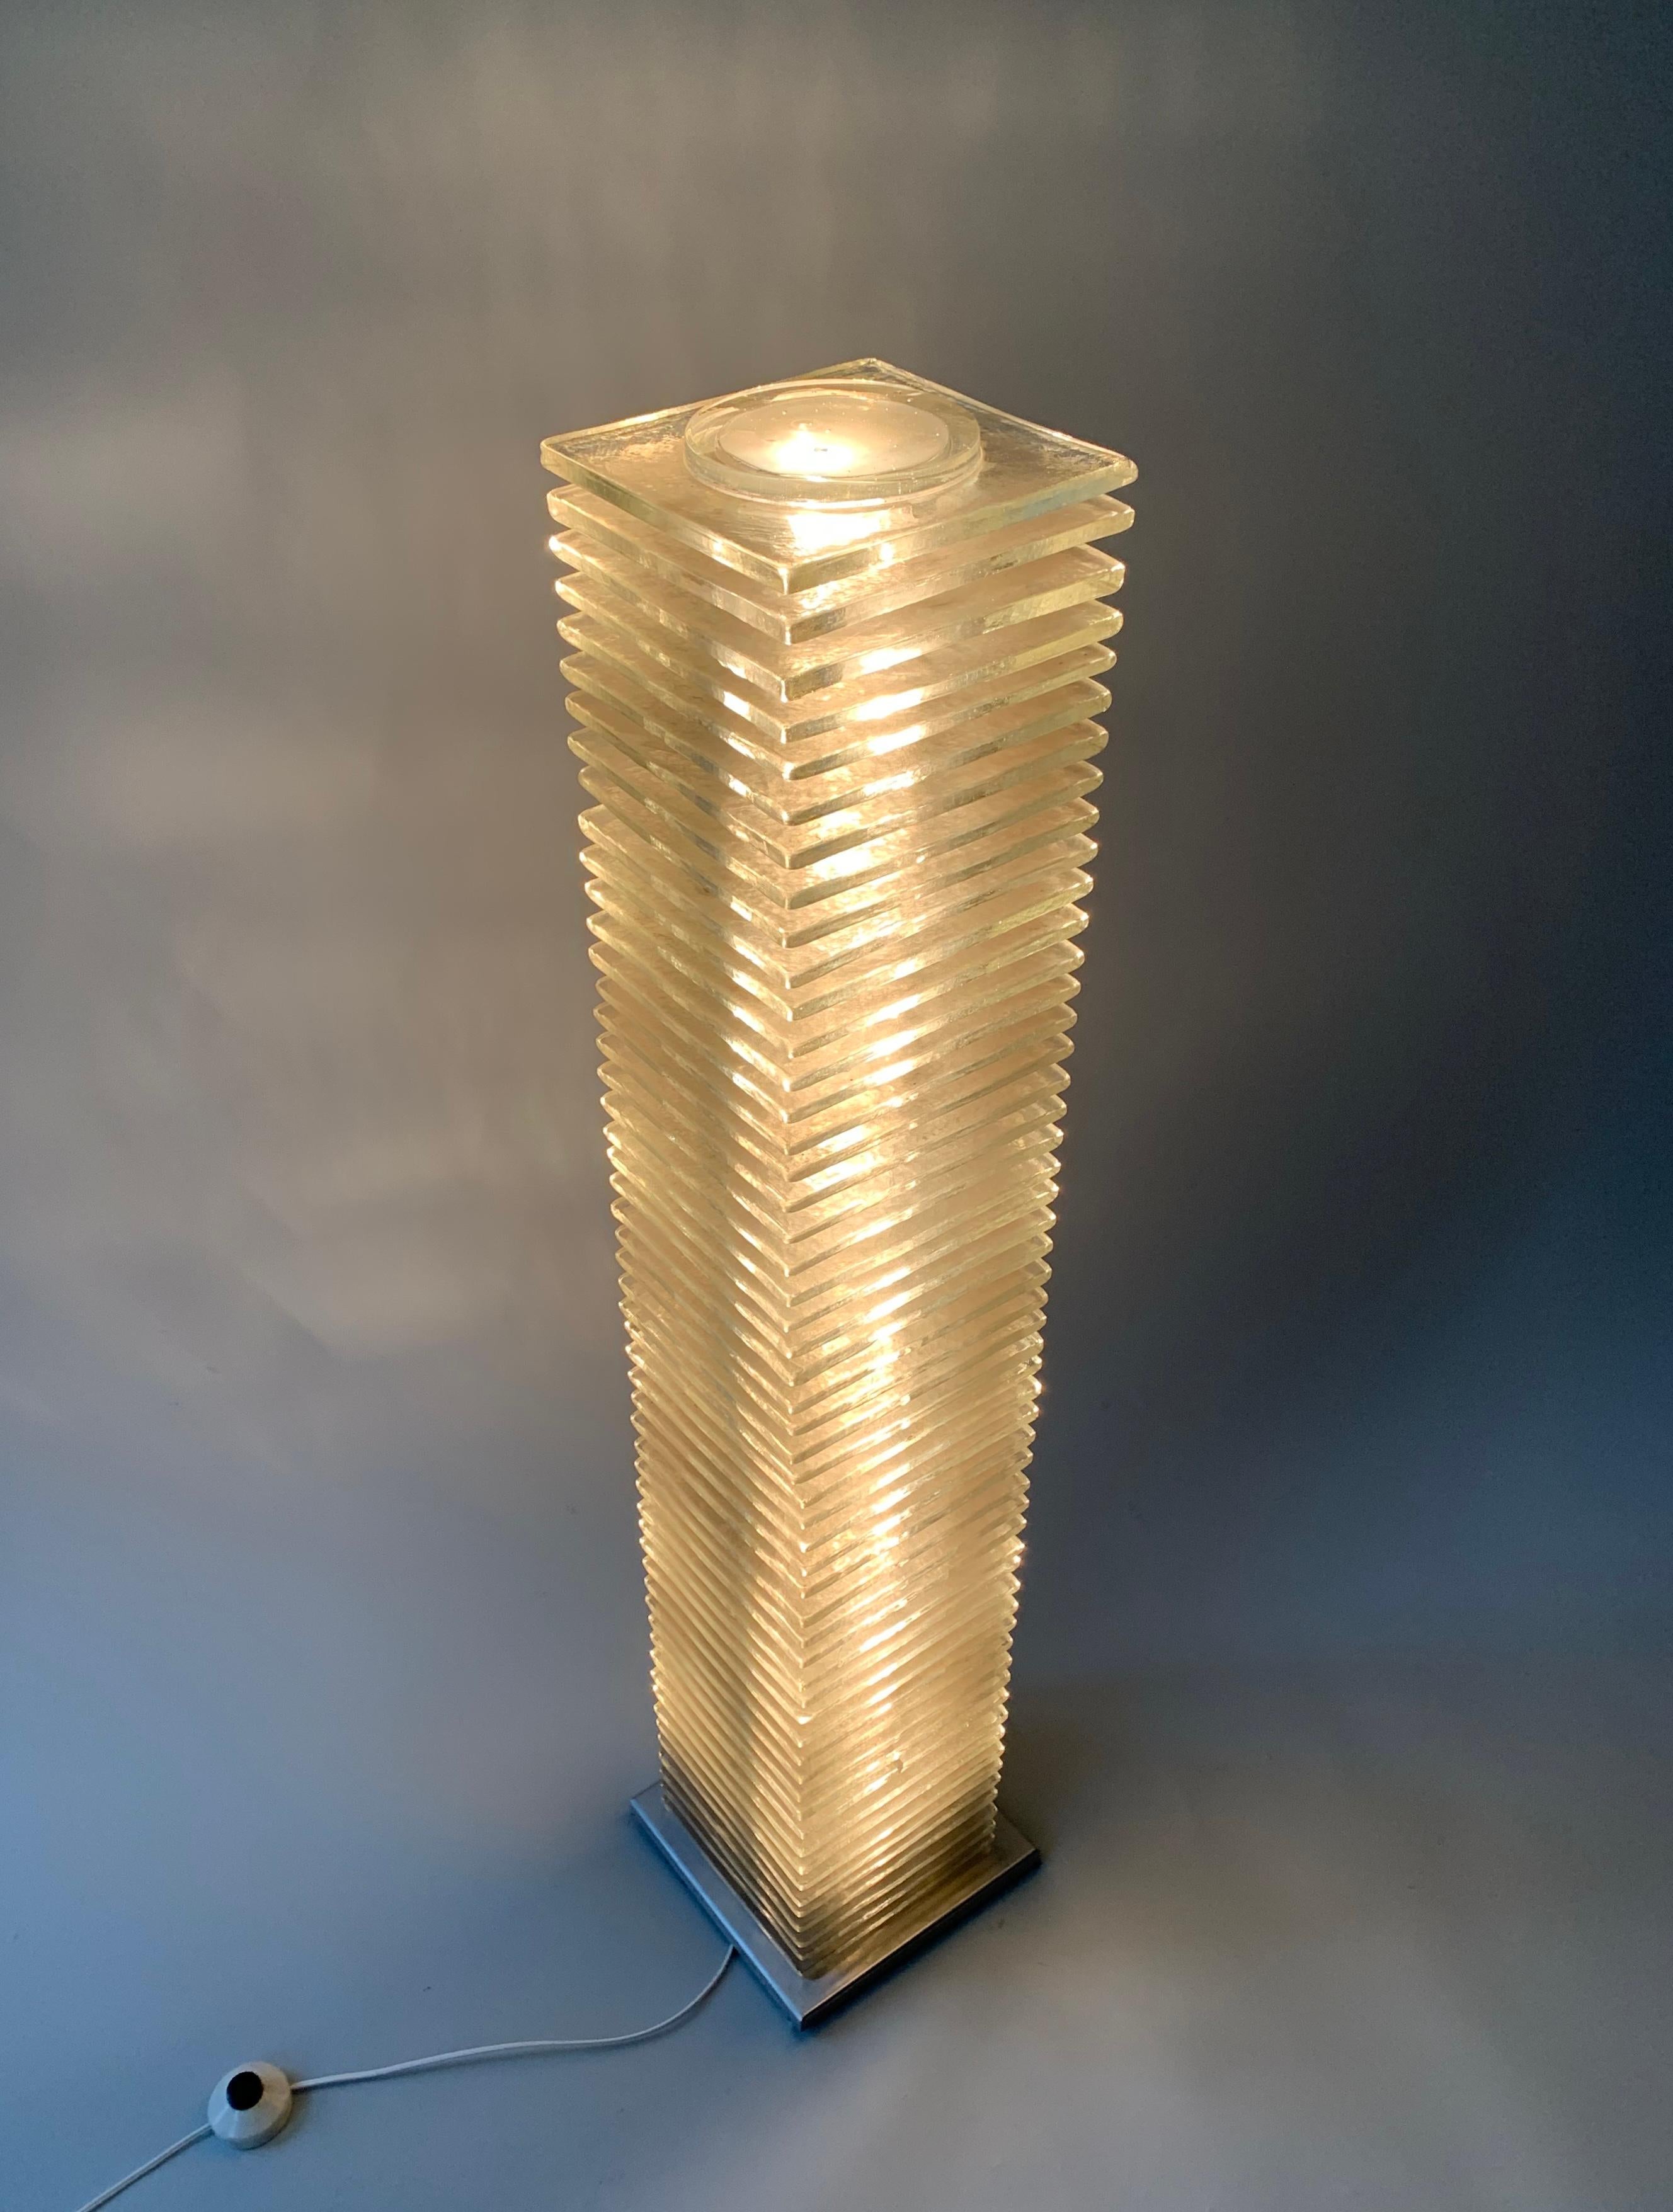 Designer: Poliarte

Item: “Lacerta” standing light

Date made: 1972

Material: stainless steel and cast glass

Size: 47.25” H x 9.75” W x 9.75” D 

Country : Italy